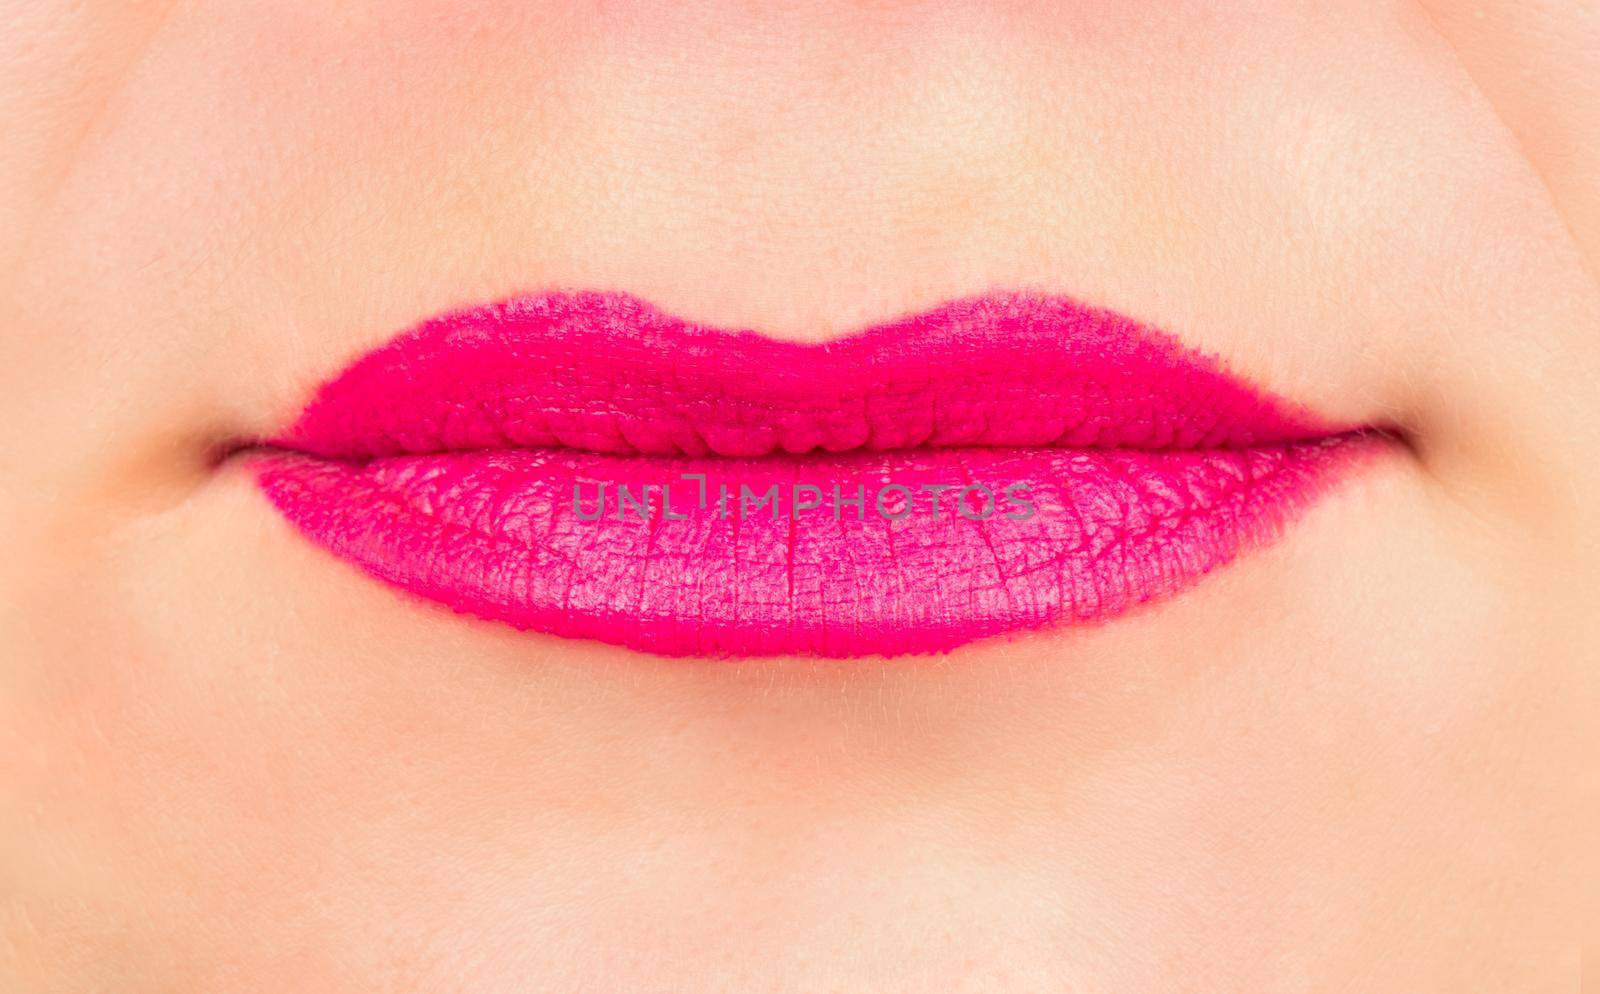 Female lips with pink lipstick close up